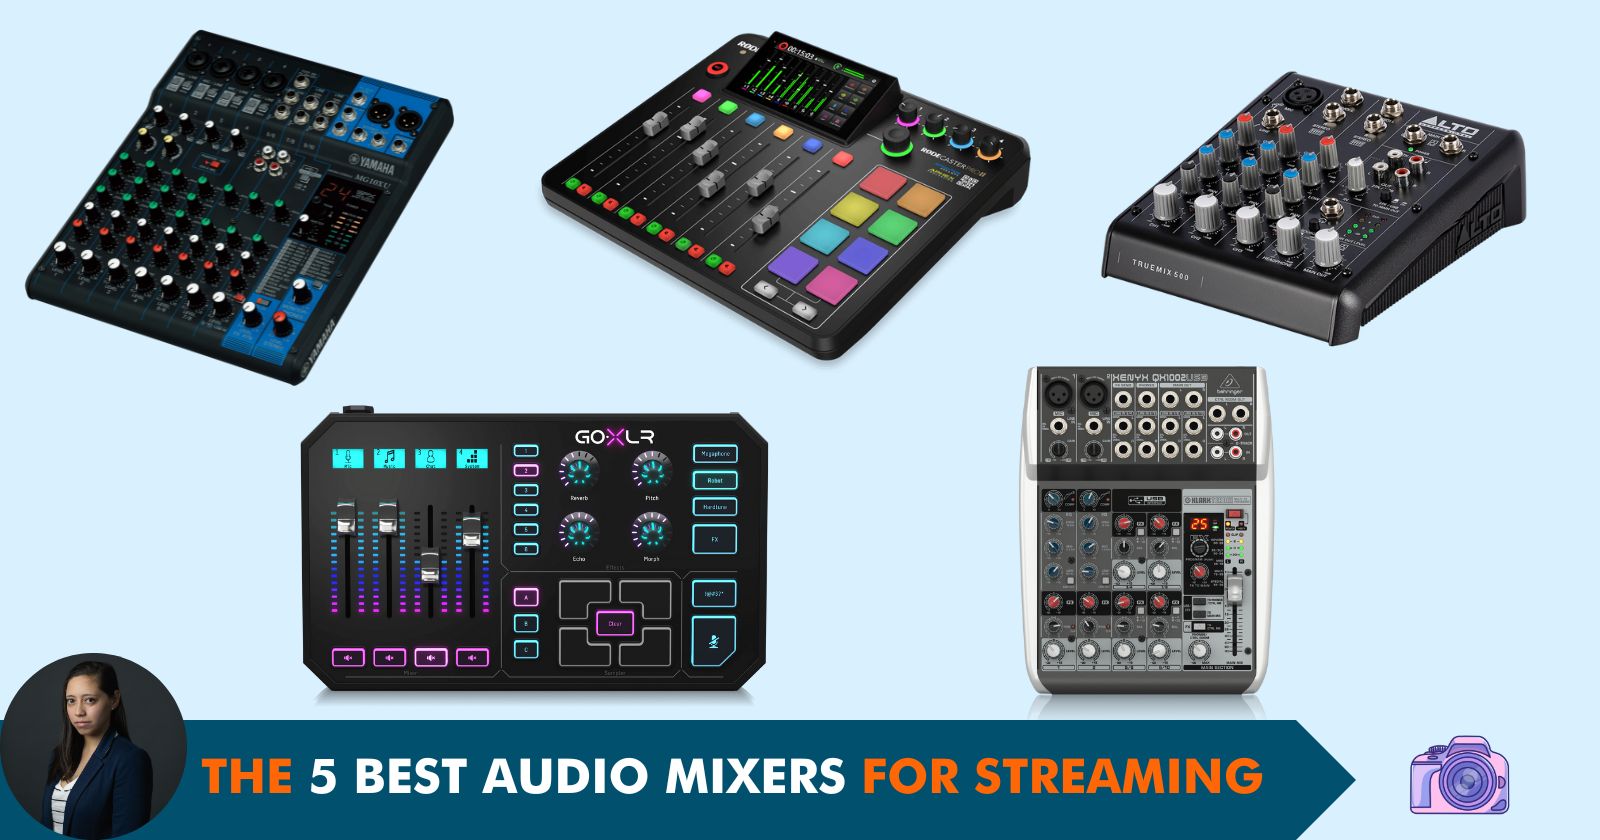 The 5 Best Audio Mixers for Streaming